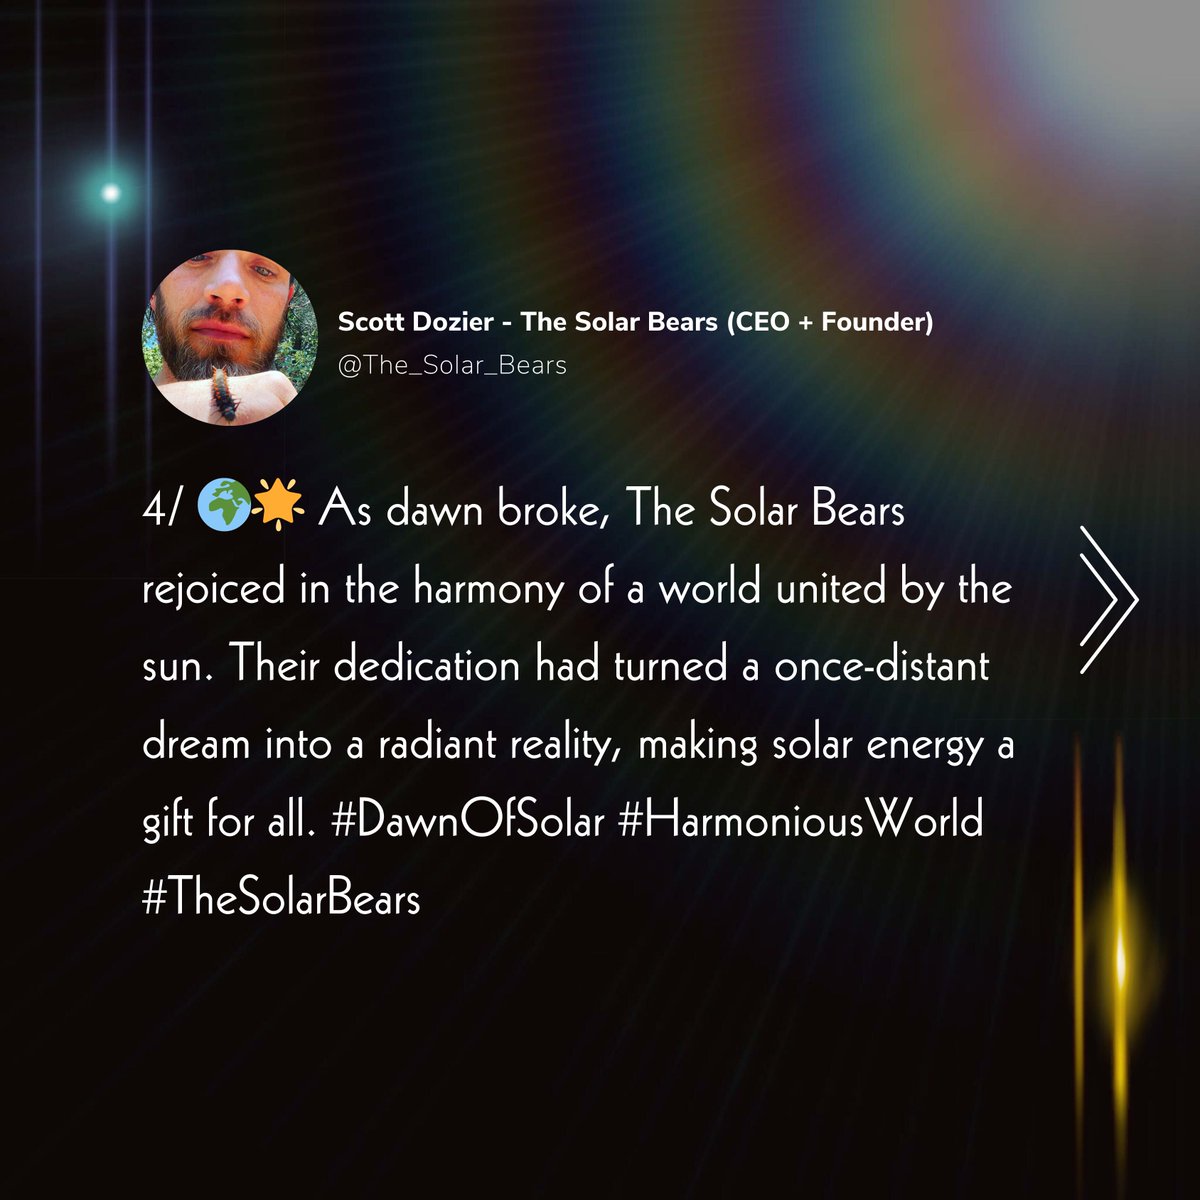 4/ 🌍🌟 As dawn broke, The Solar Bears rejoiced in the harmony of a world united by the sun. Their dedication had turned a once-distant dream into a radiant reality, making solar energy a gift for all. #DawnOfSolar #HarmoniousWorld #TheSolarBears

Contact: linktr.ee/solarbears